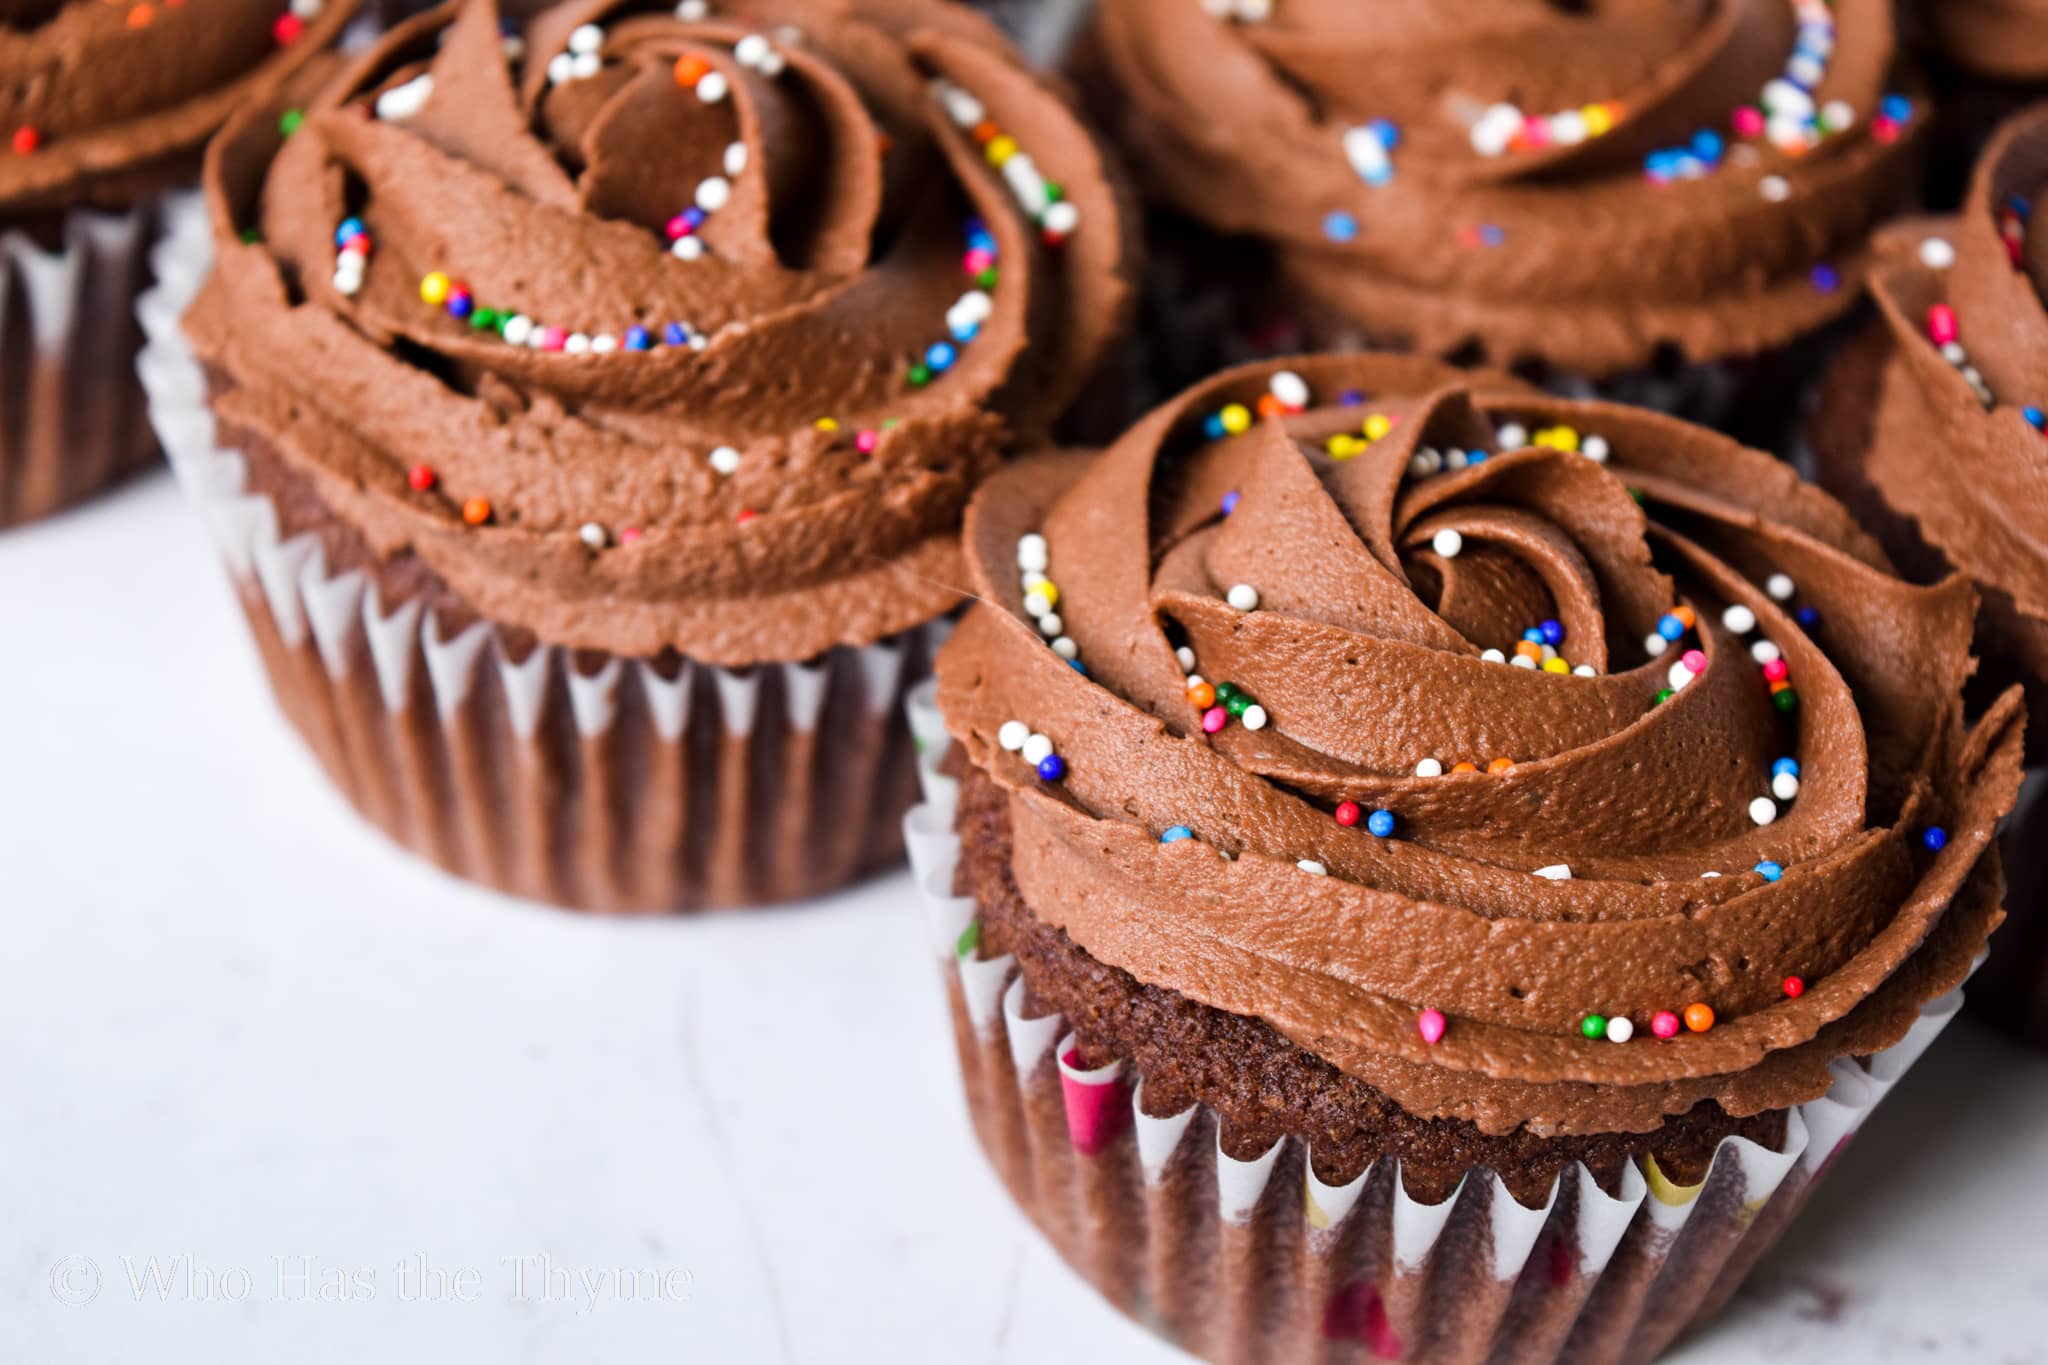 Gluten free chocolate cupcakes with sprinkles